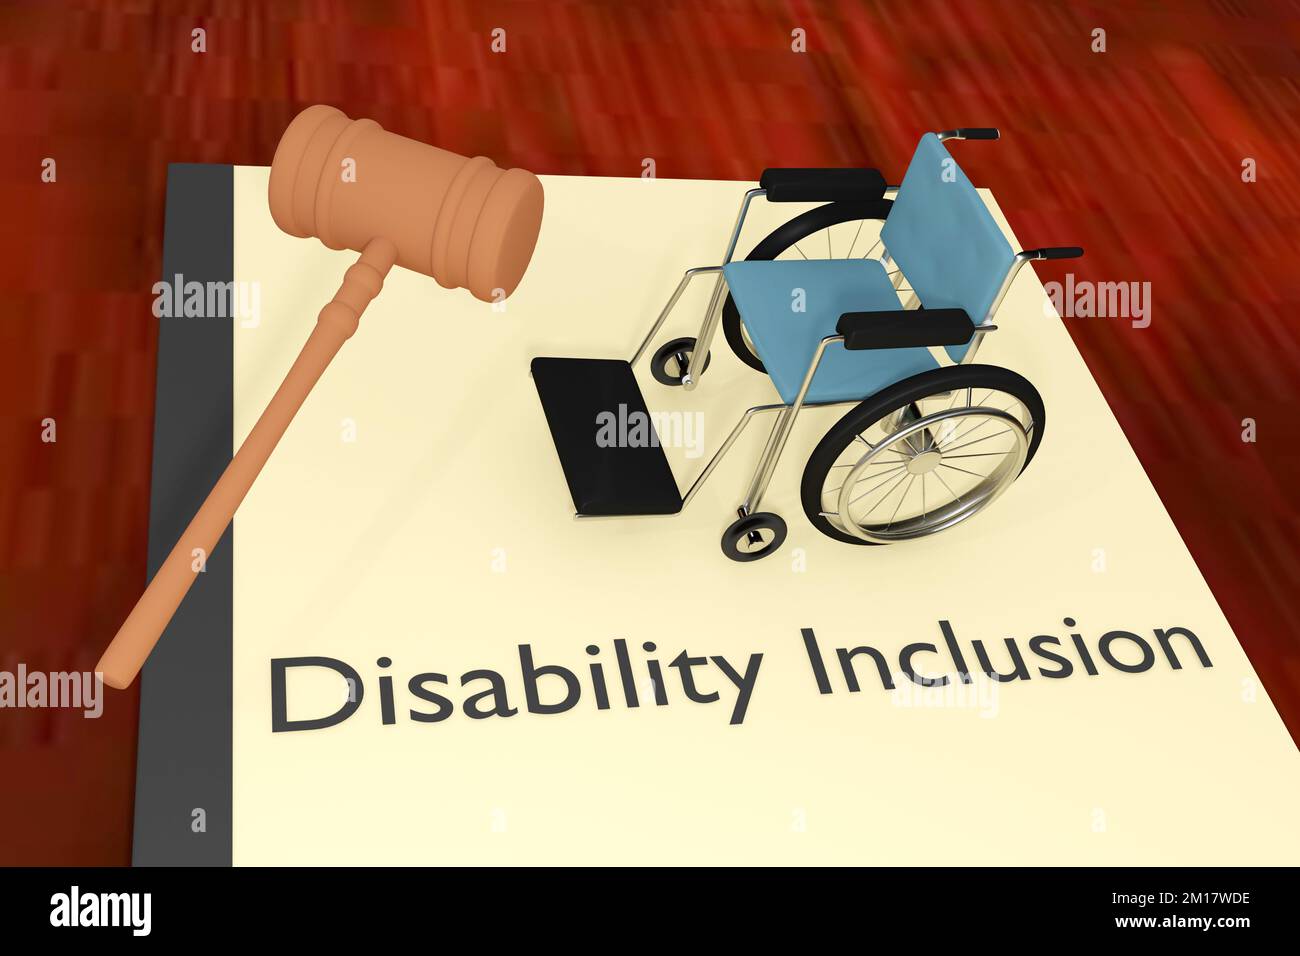 3D illustration of a judge gavel and Disability Inclusion title on legal booklet, along with symbolic wheelchair. Stock Photo